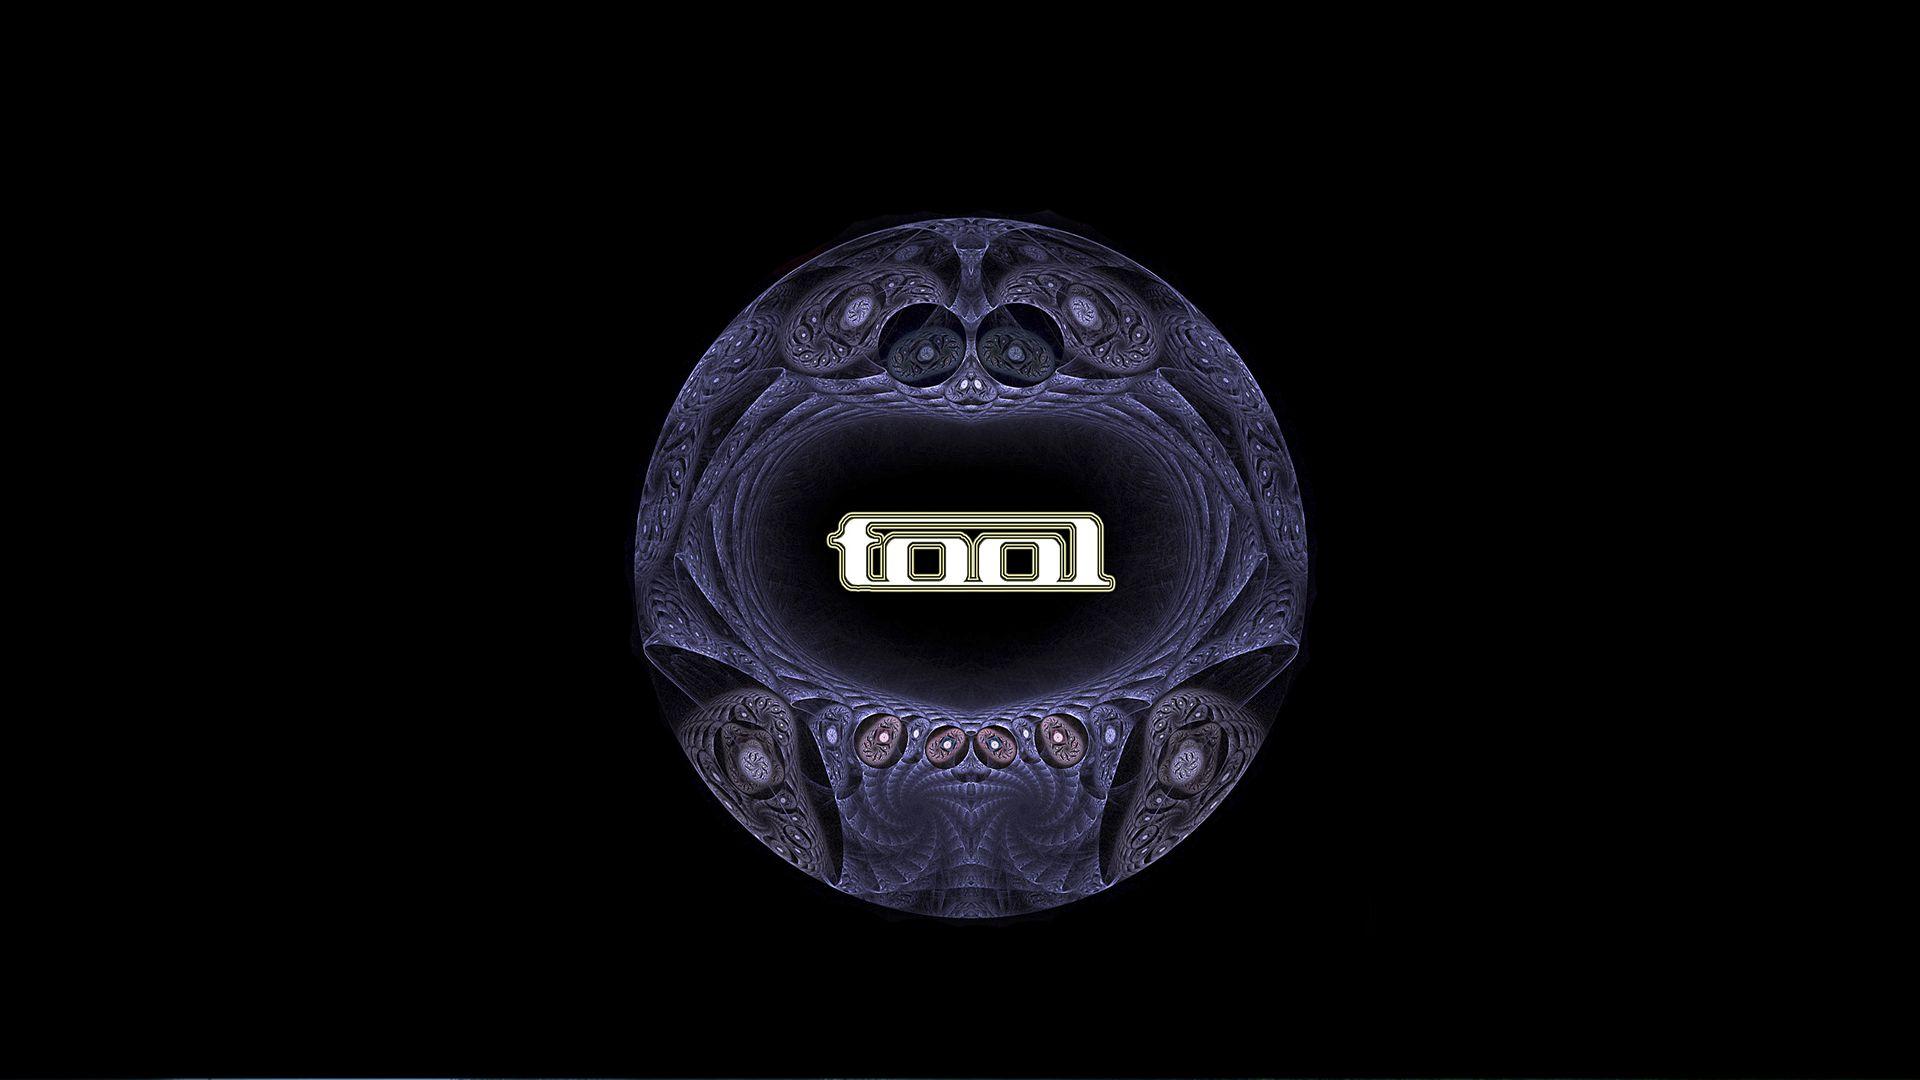 TOOL band wallpaper  ALL ABOUT MUSIC  Tool band Tool band artwork Band  wallpapers